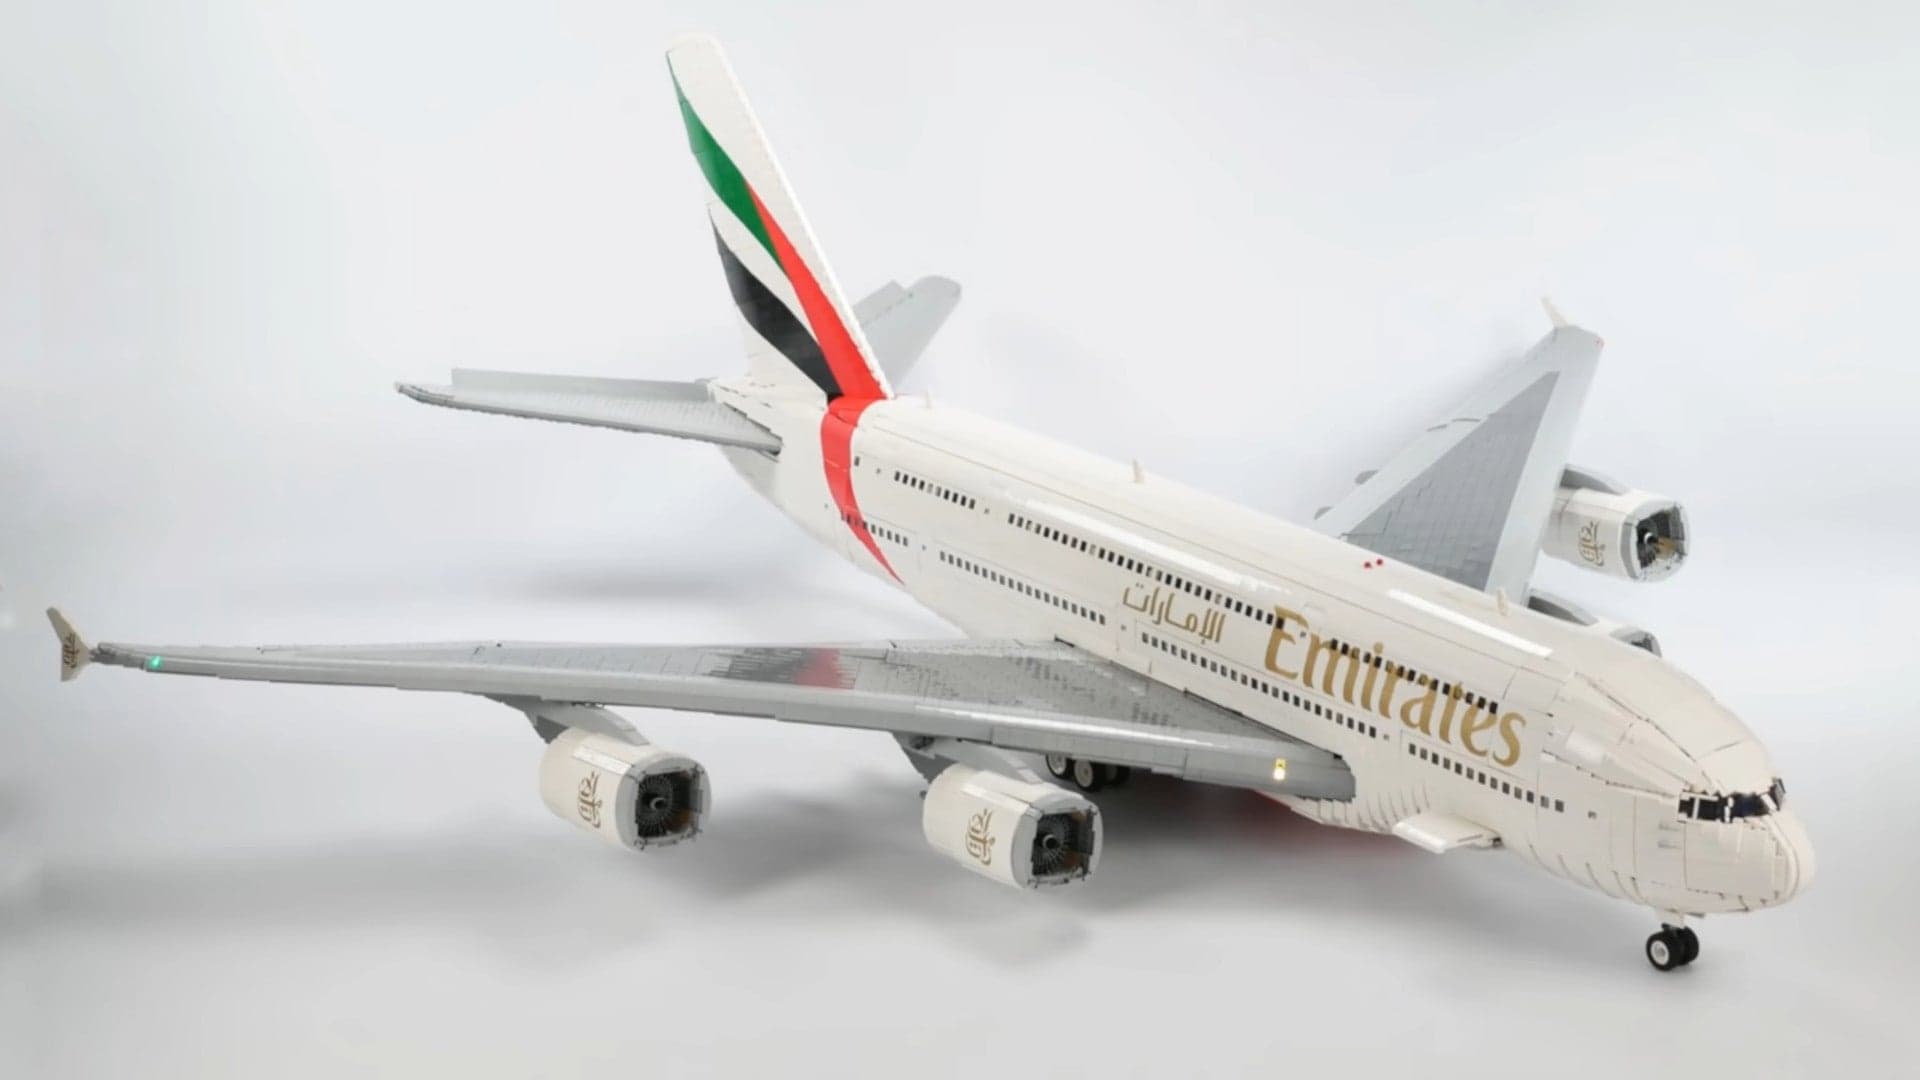 Lego Airbus A380 Is a Spot-On Recreation of the World’s Largest Airliner